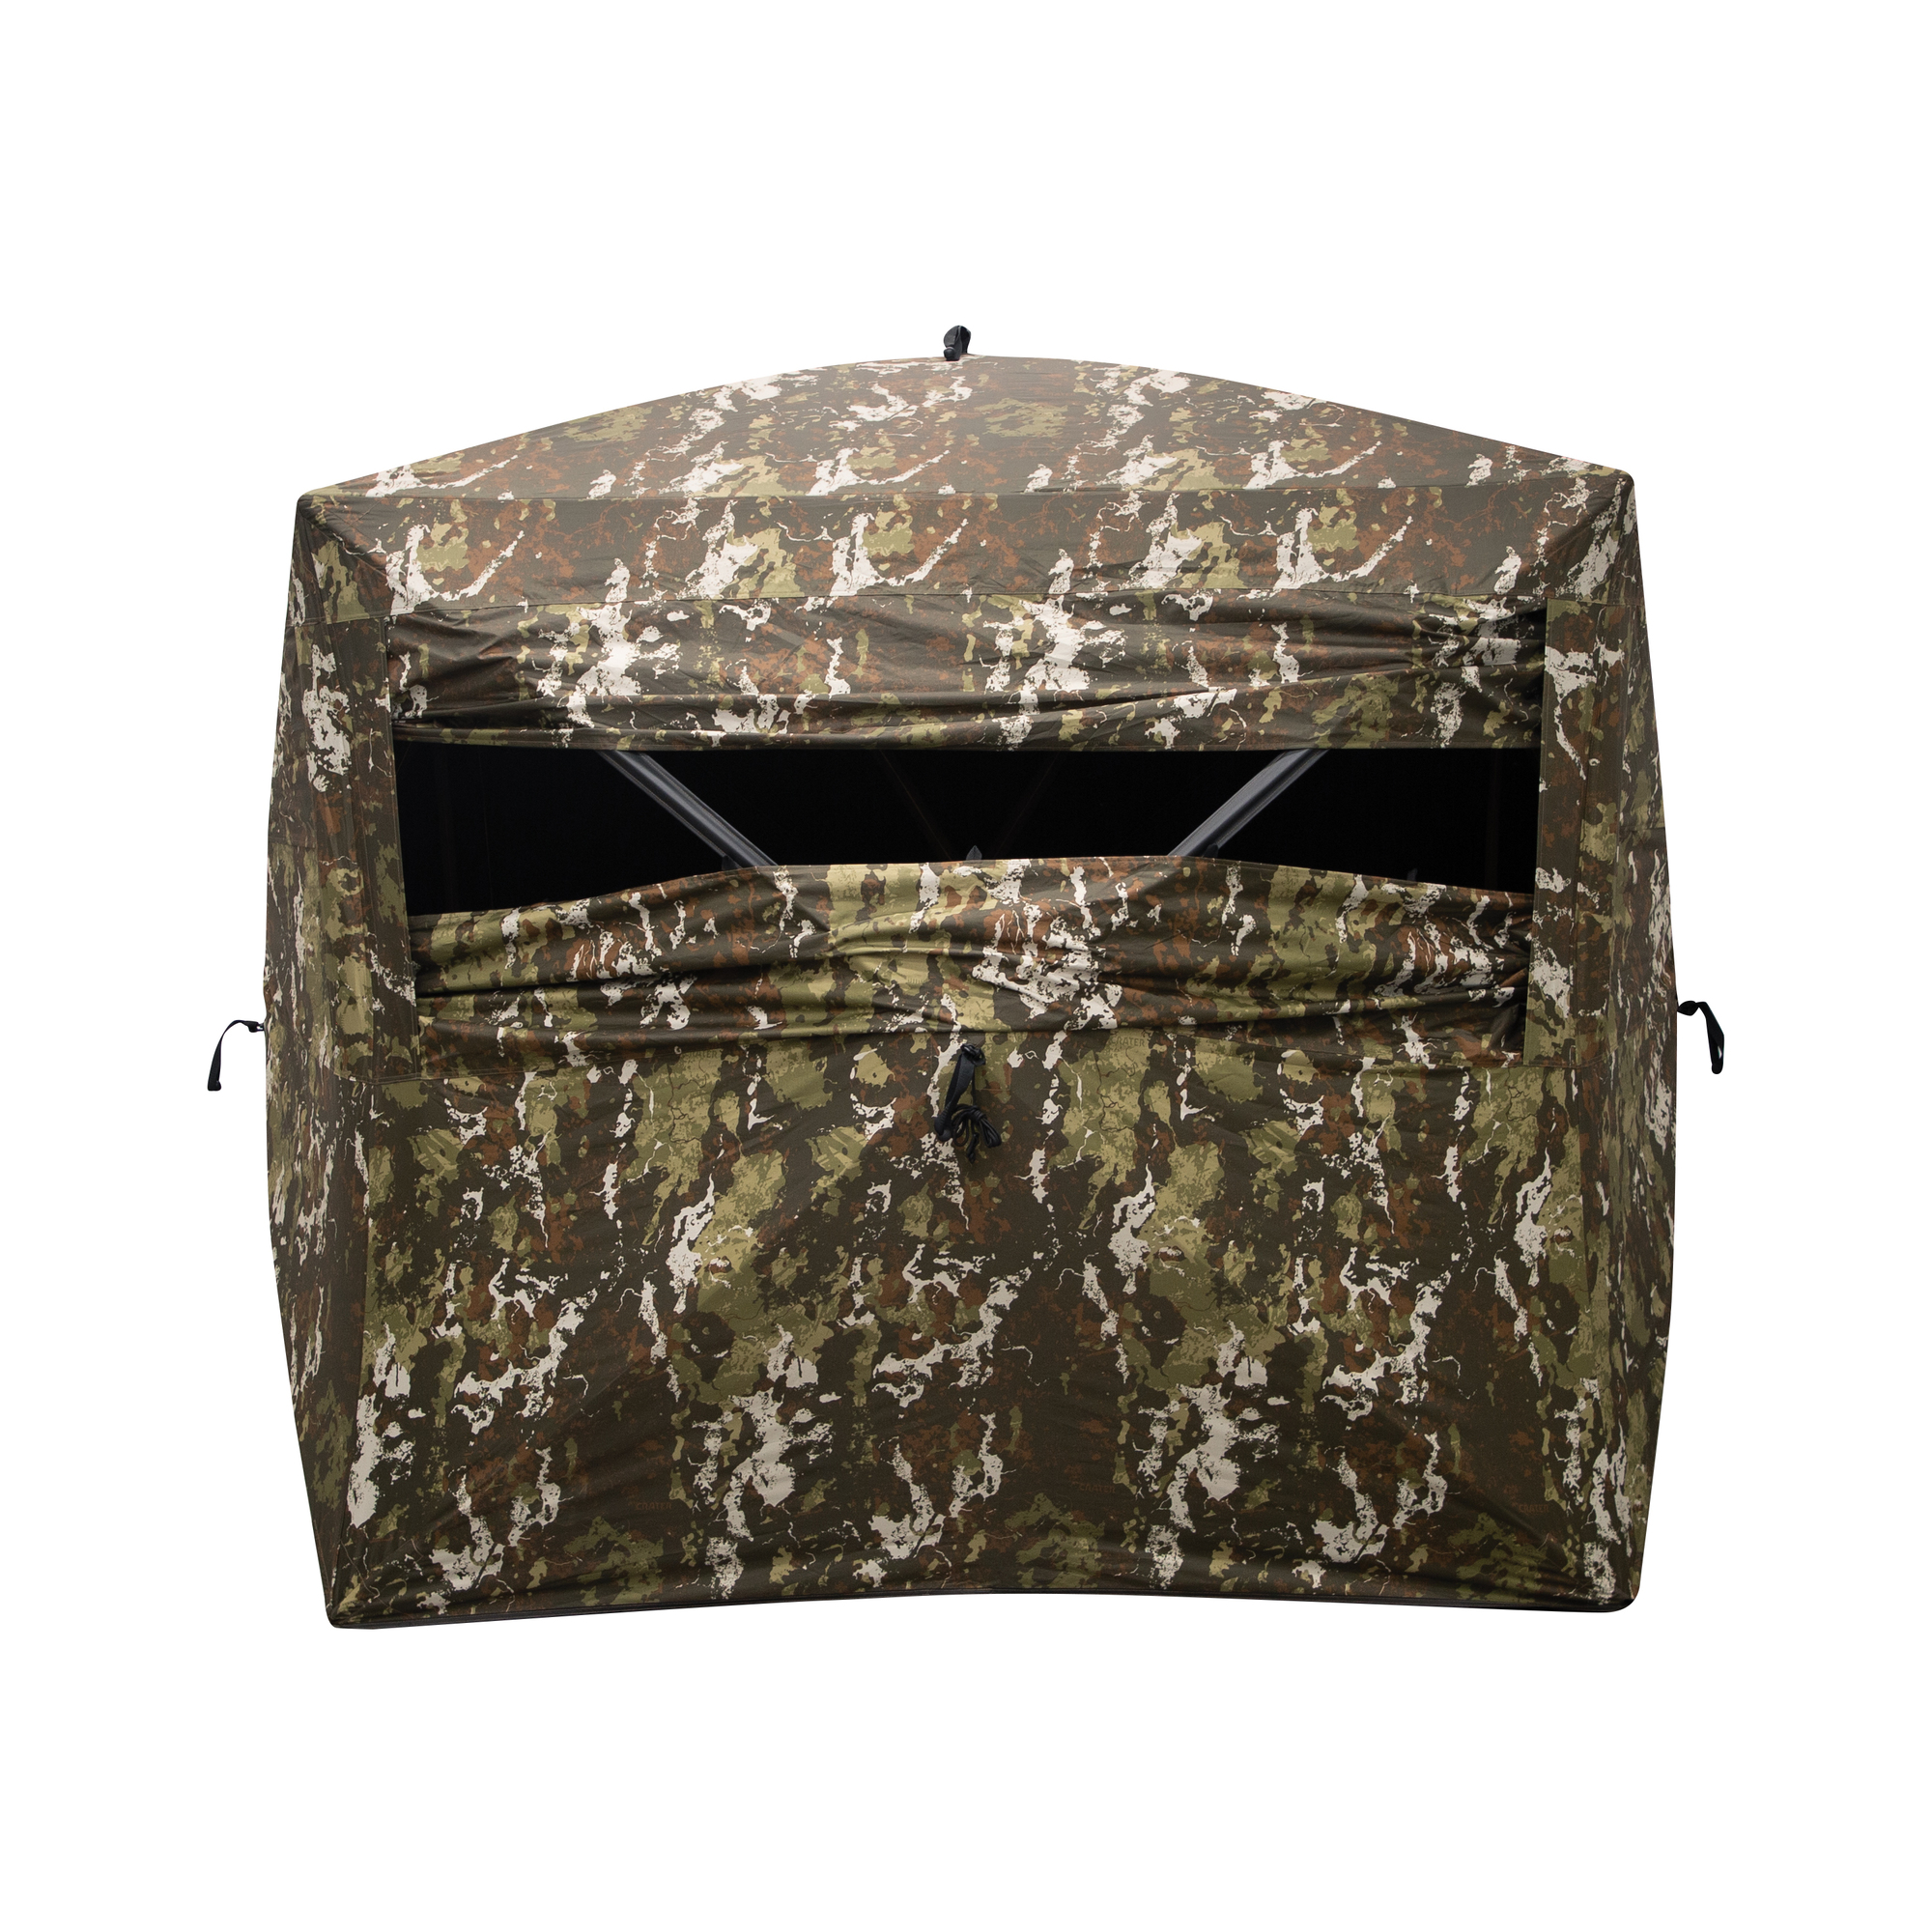 Barronett Blinds, Wide Side 95 Hunting Blind, 2-Person Capacity, Color Camouflage, Material Polyester, Model WS95CH